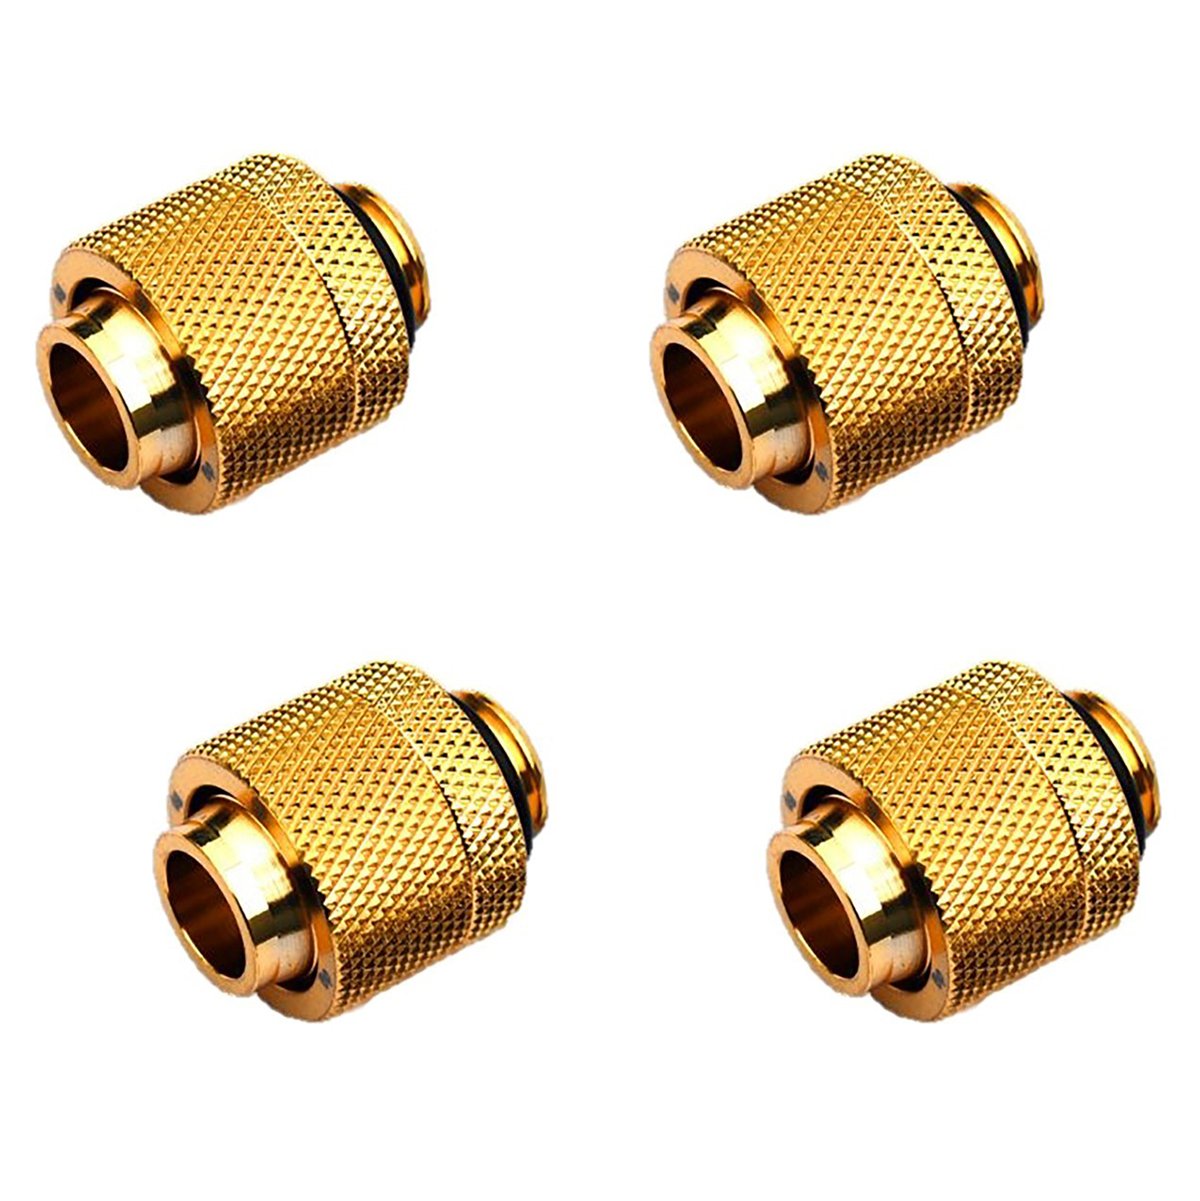 Bitspower G1/4" to 1/2" ID, 5/8" OD Compression Fitting V3 for Soft Tubing, True Golden, 4-Pack